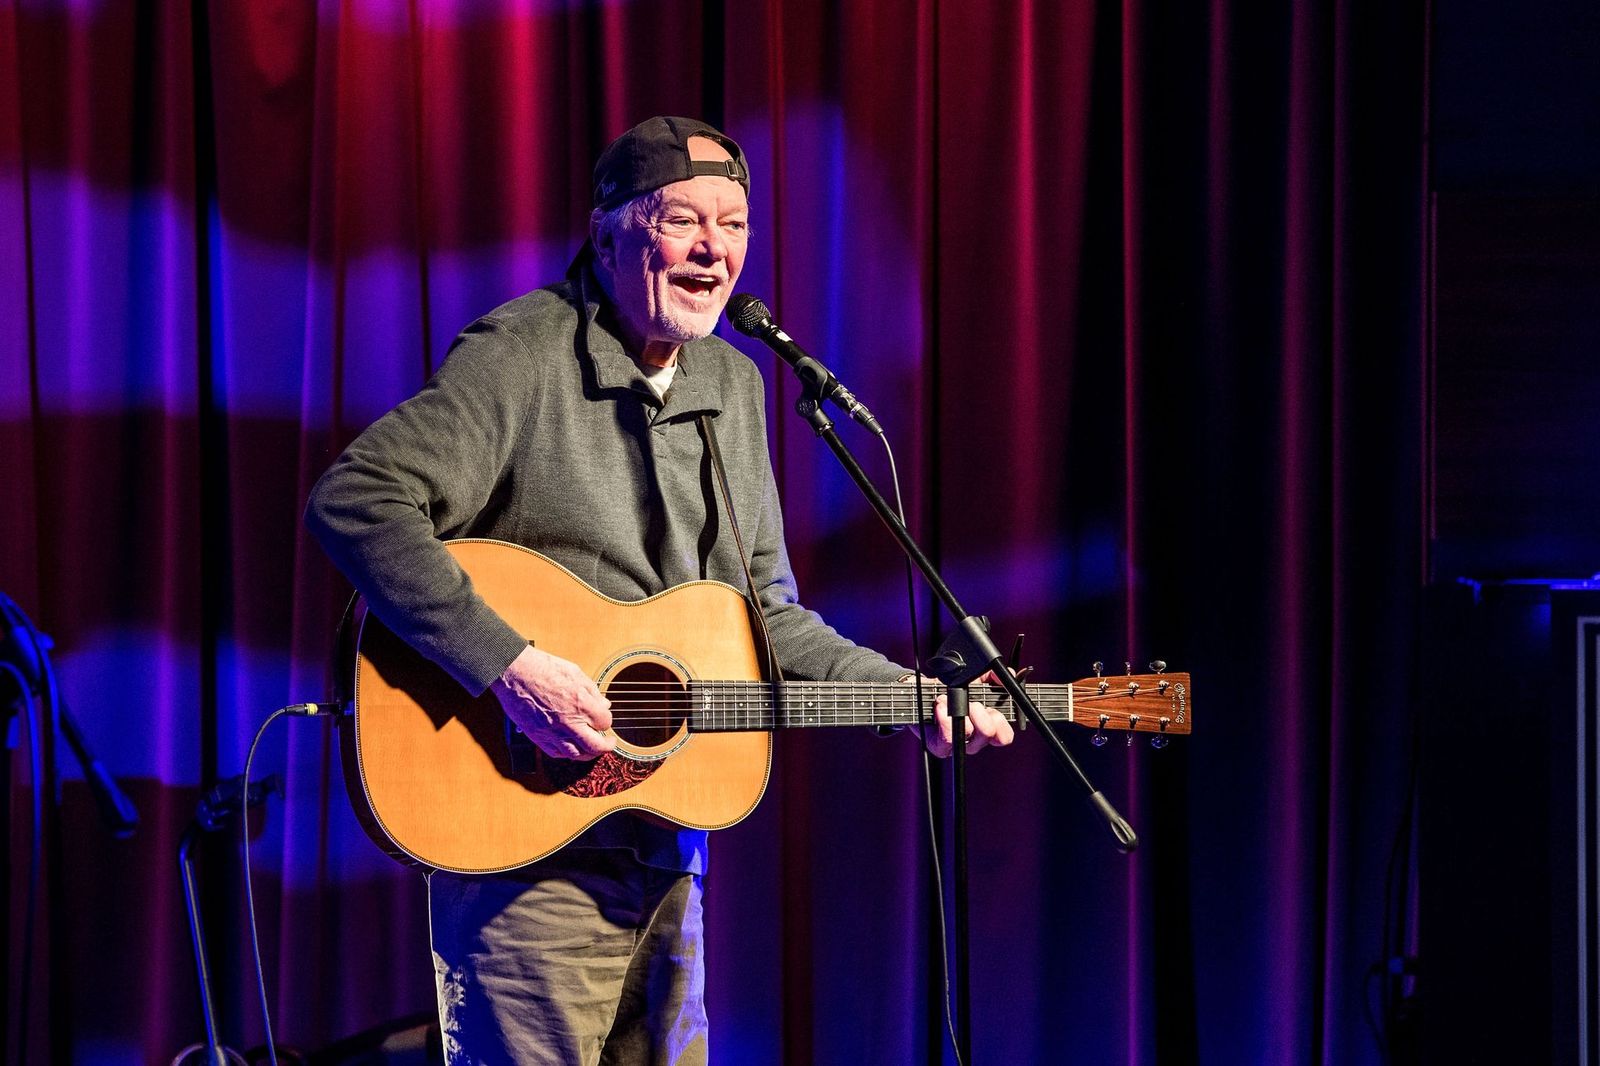  Rusty Young performs at The GRAMMY Museum on February 8, 2018 | Getty Images